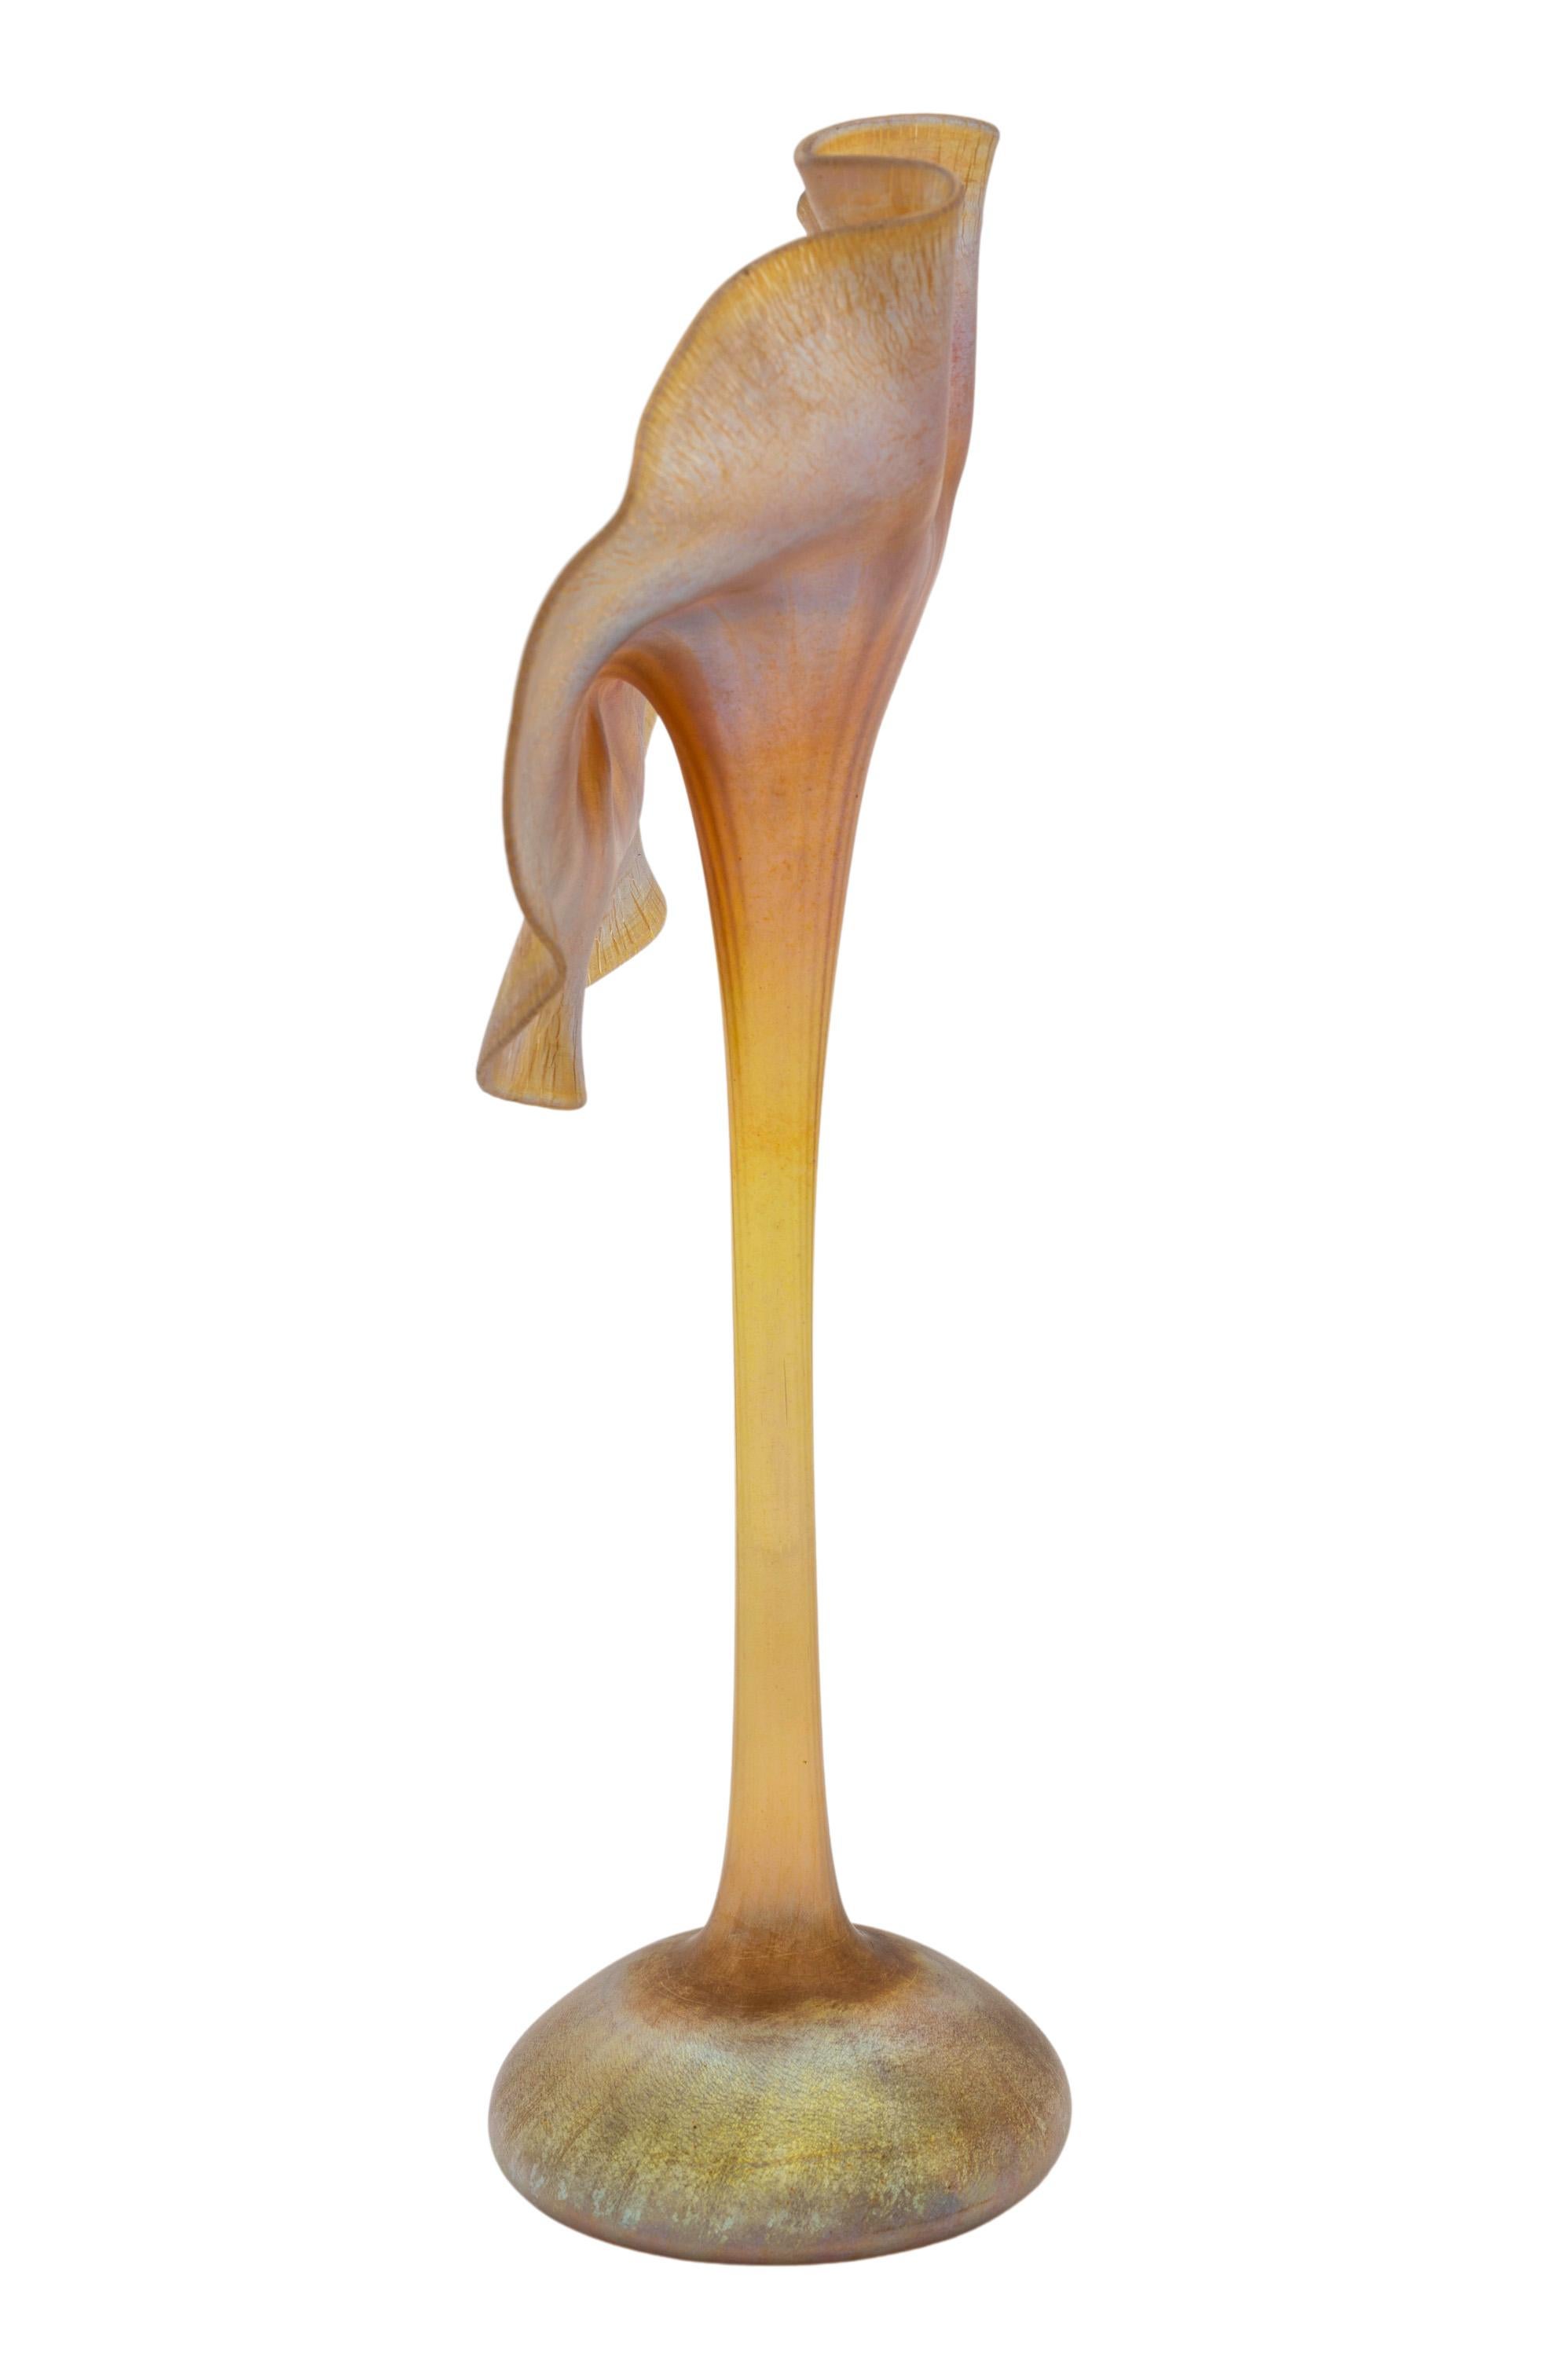 American Jack-in-the-pulpit Vase Louis C. Tiffany New York Tiffany Studios 1906 Yellow  For Sale